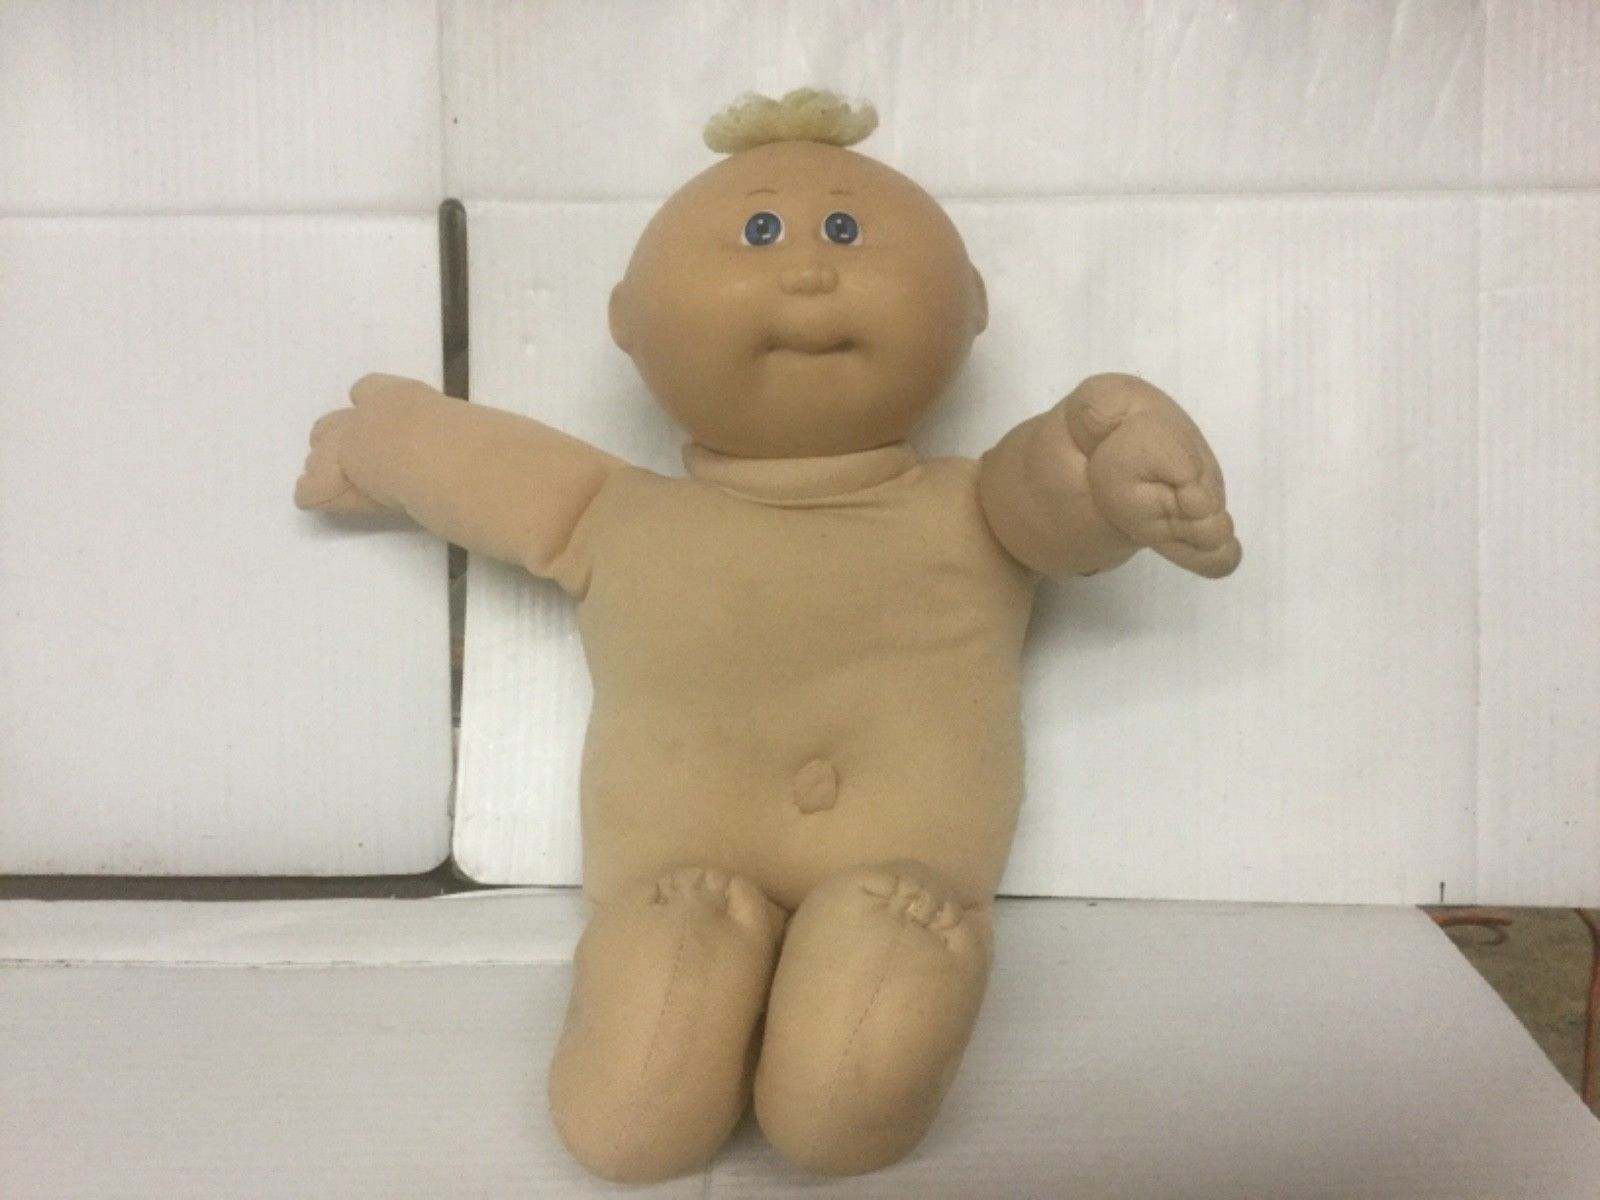 1985 cabbage patch doll